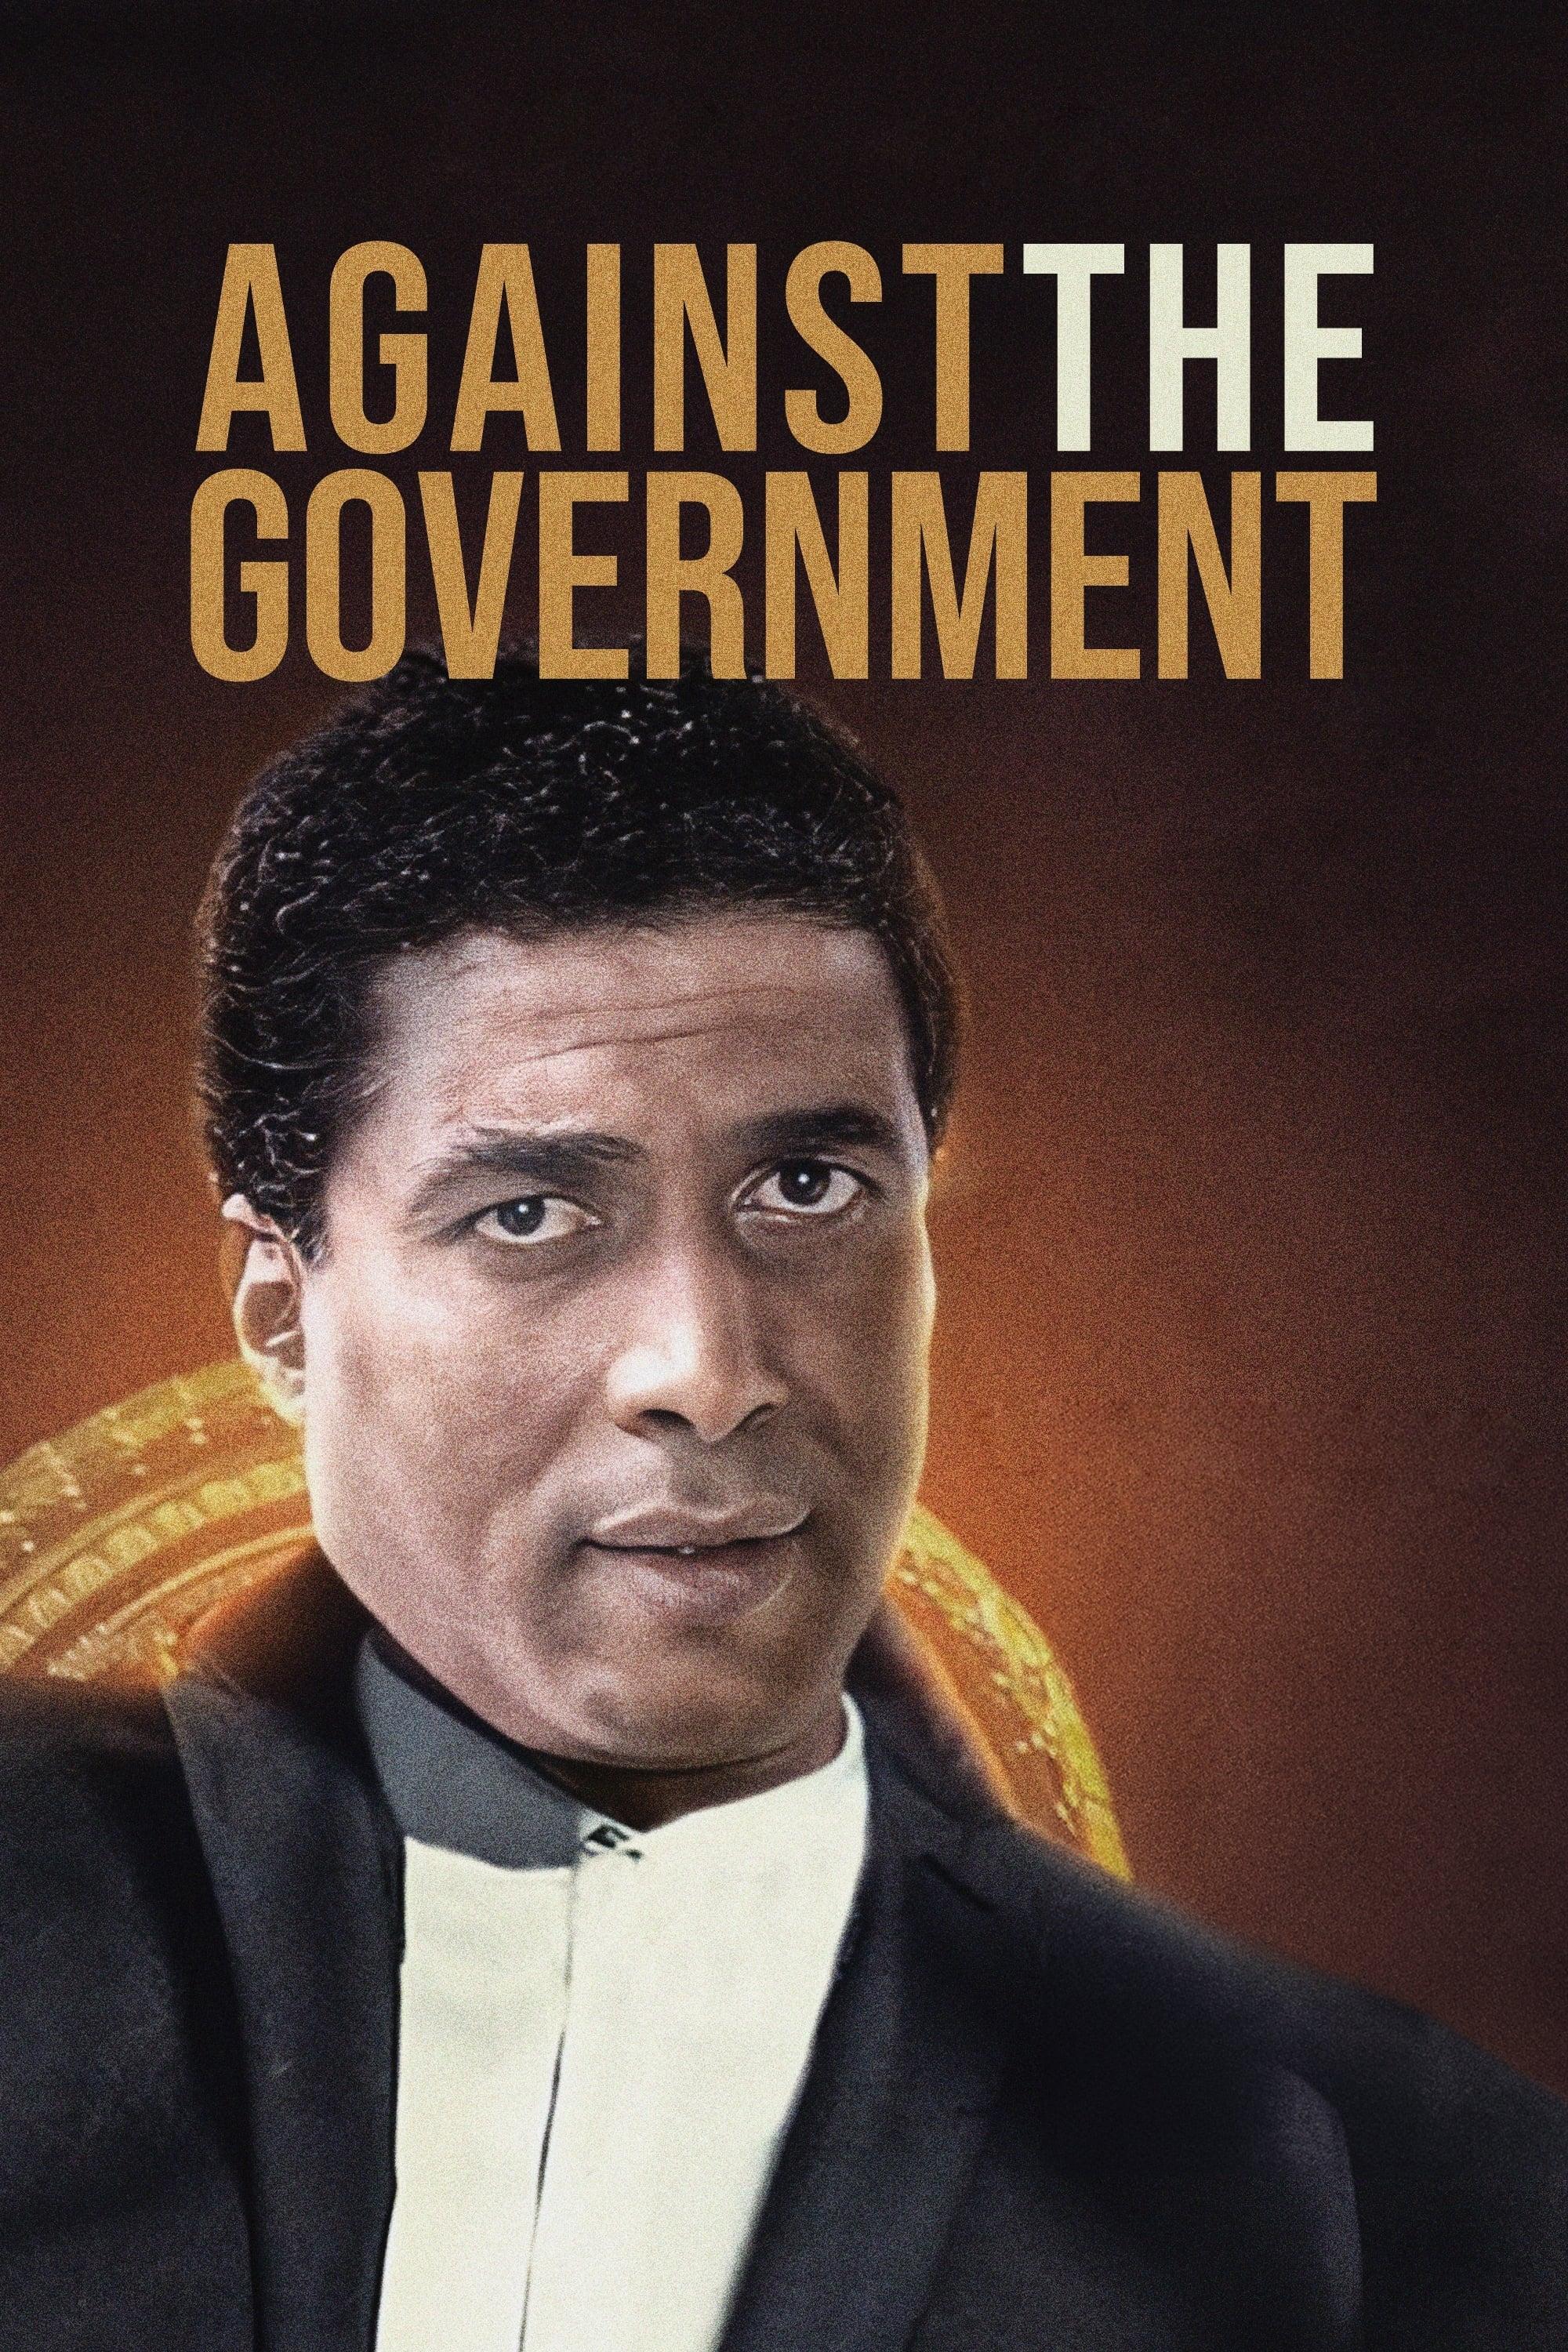 Against the Government poster